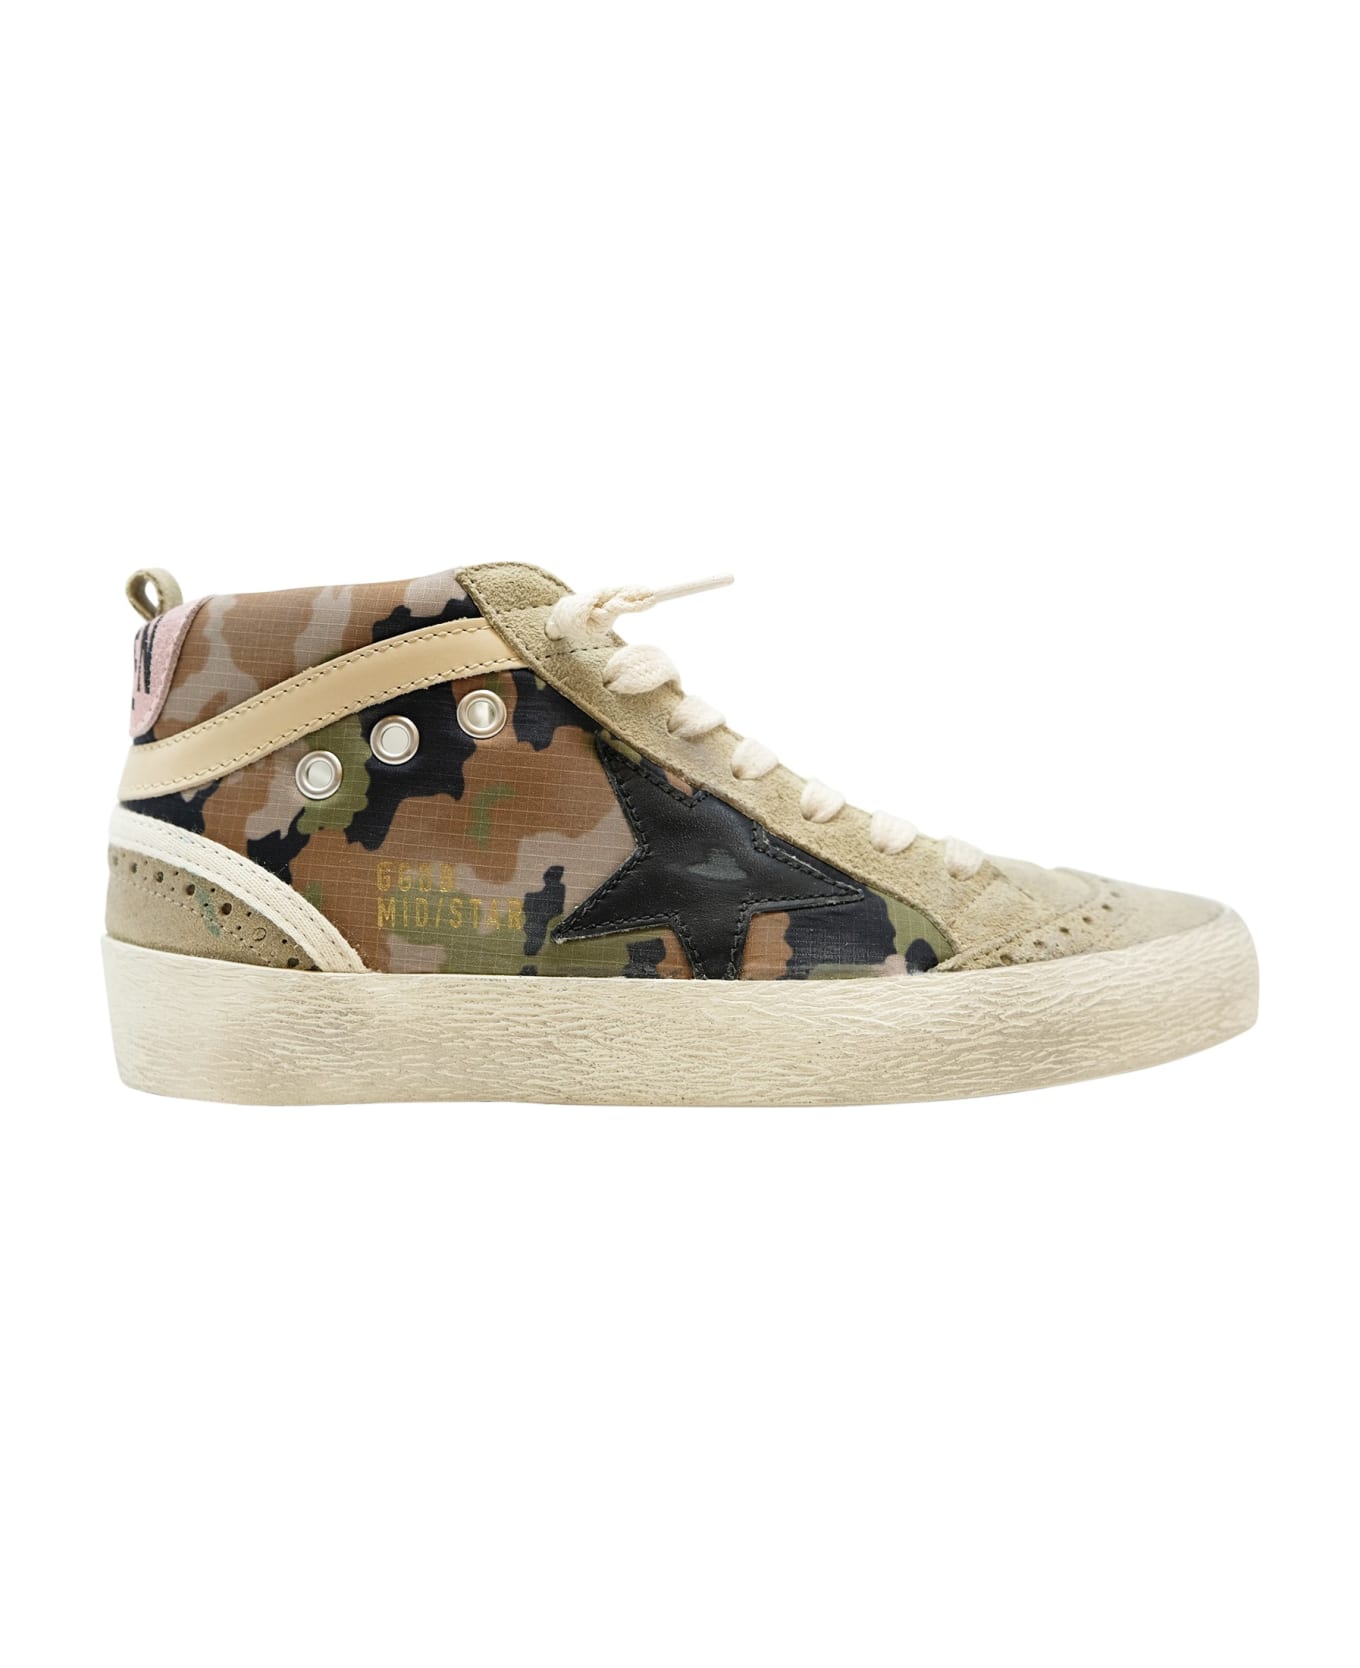 Golden Goose Mid Star Sneakers - CAMOUFLAGE